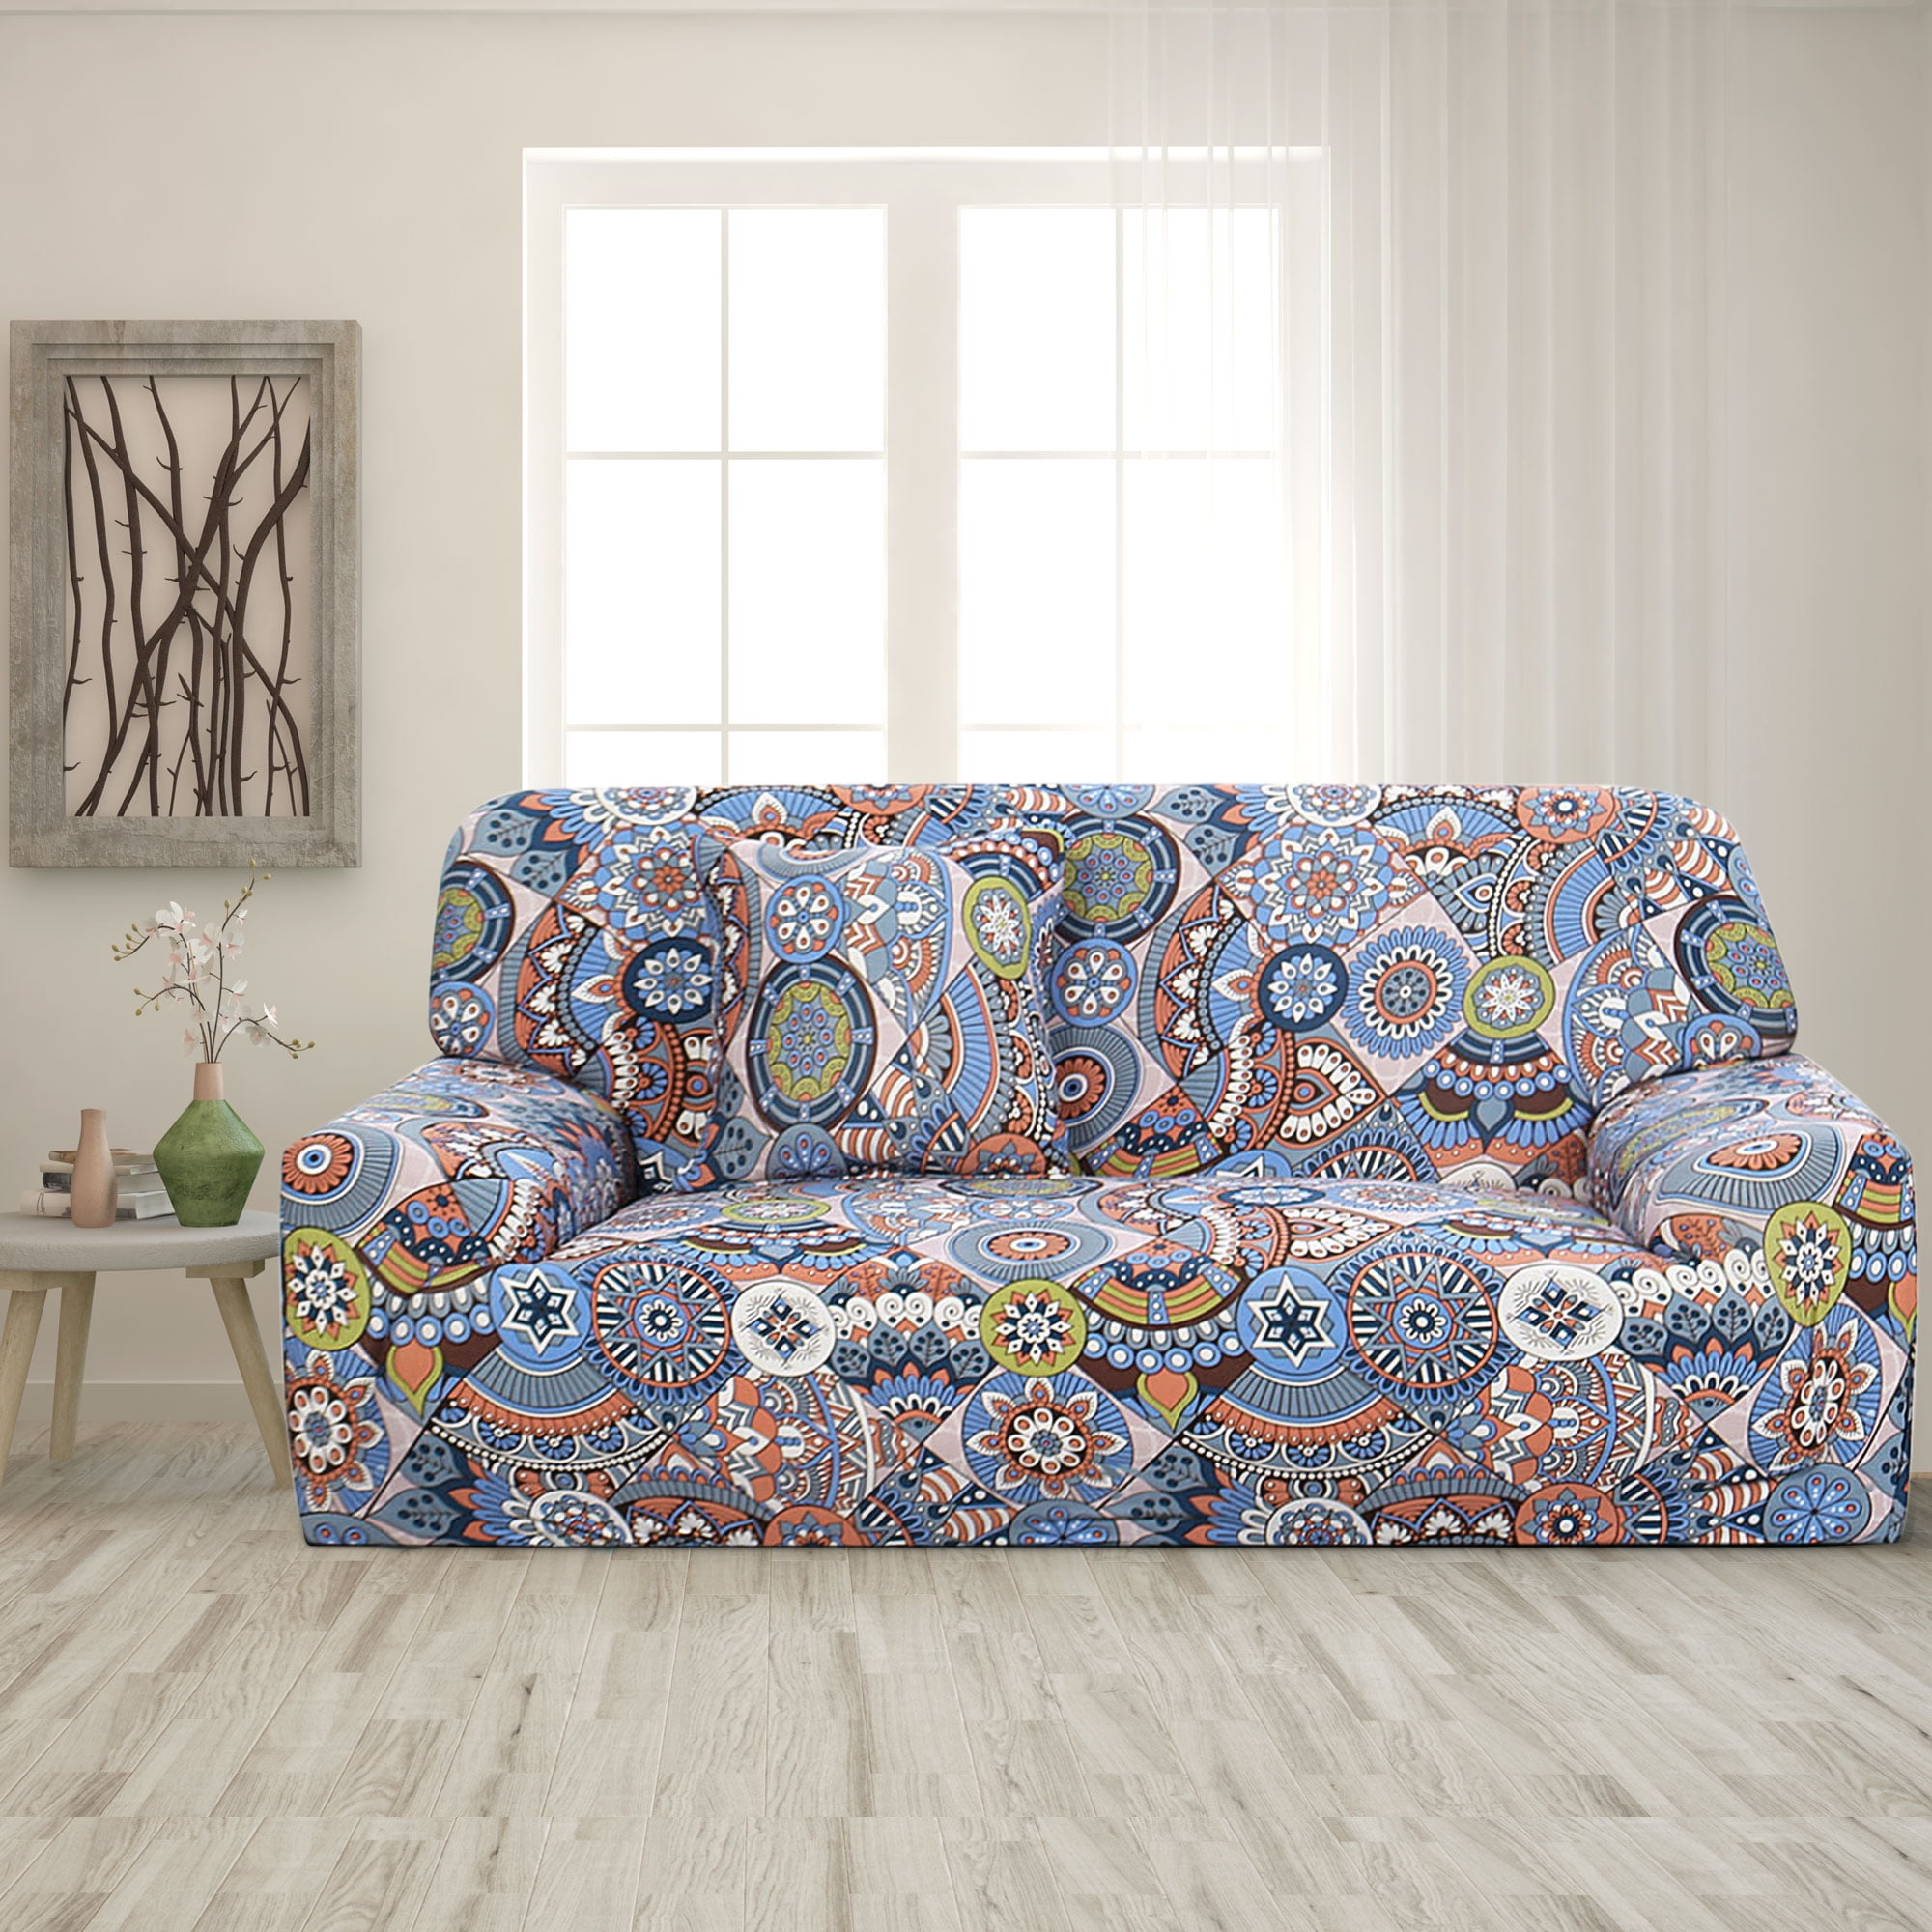 Details about   Blue Leaves Soft Elastic Sofa Cover Washable Sofa Slipcover Furniture Household 